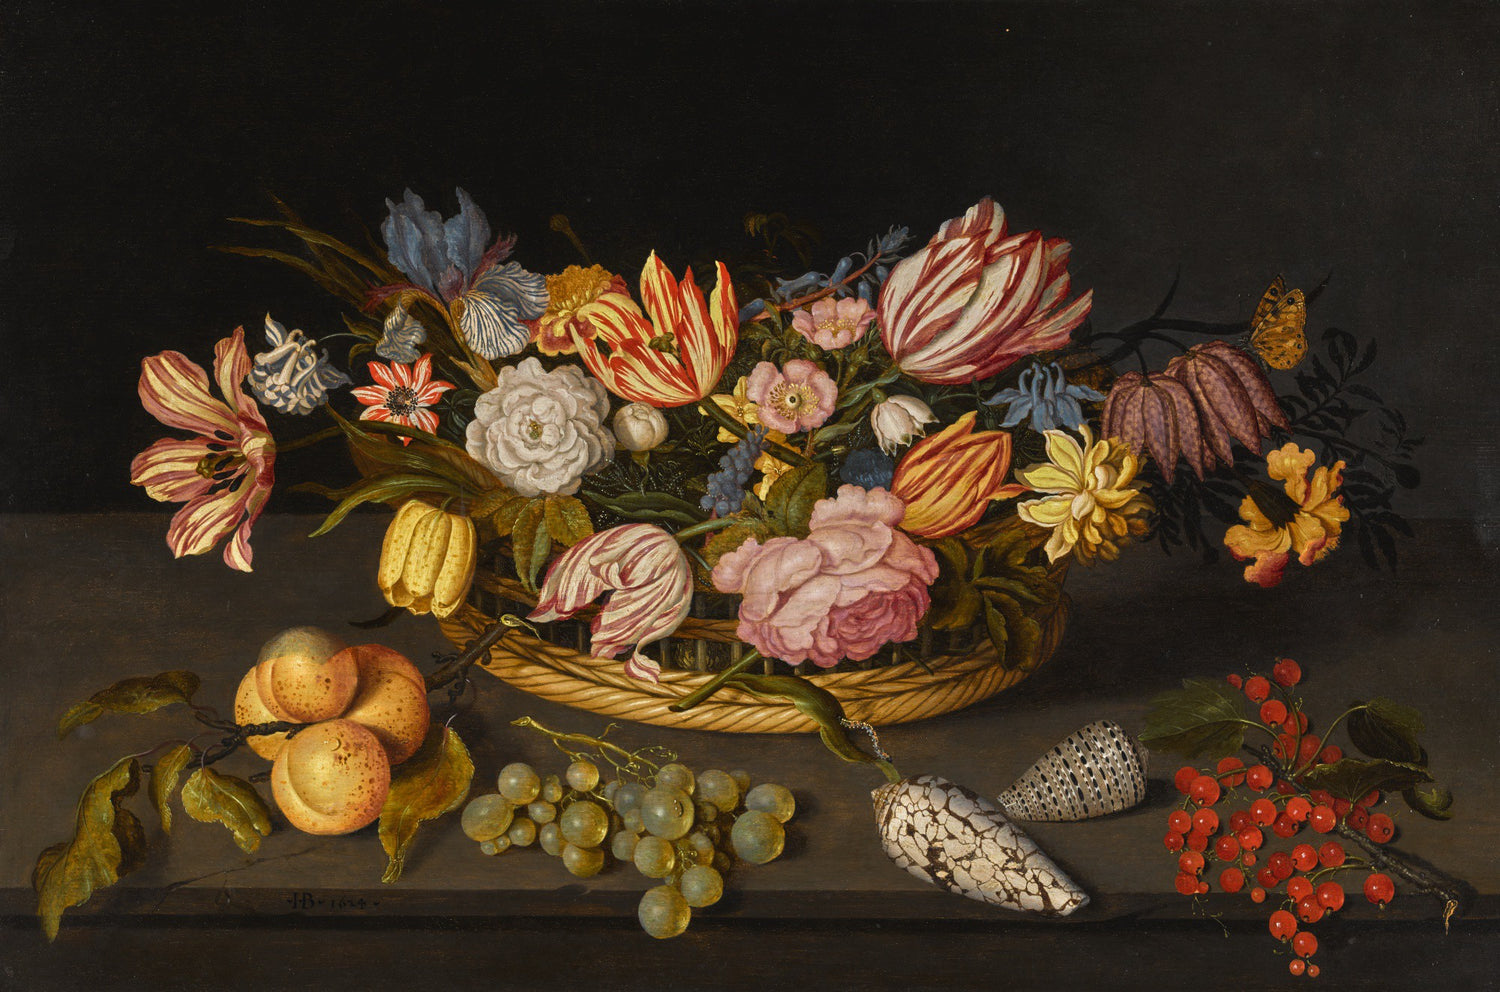 Still life painting by of flowers in a basket with shells and fruits by Johannes Bosschaert 